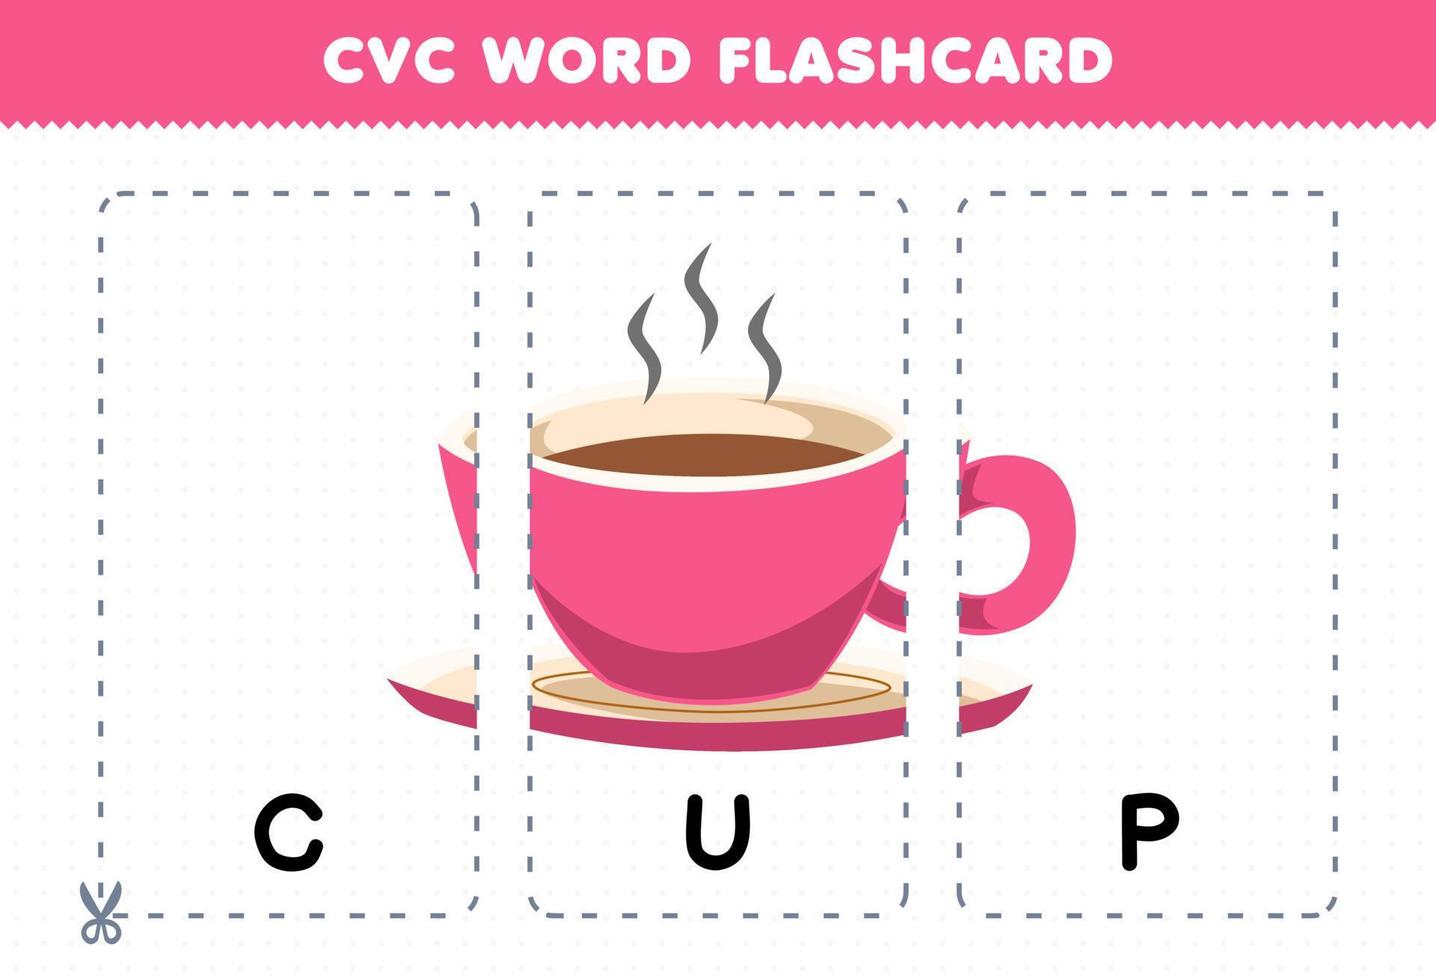 Education game for children learning consonant vowel consonant word with cute cartoon CUP illustration printable flashcard vector